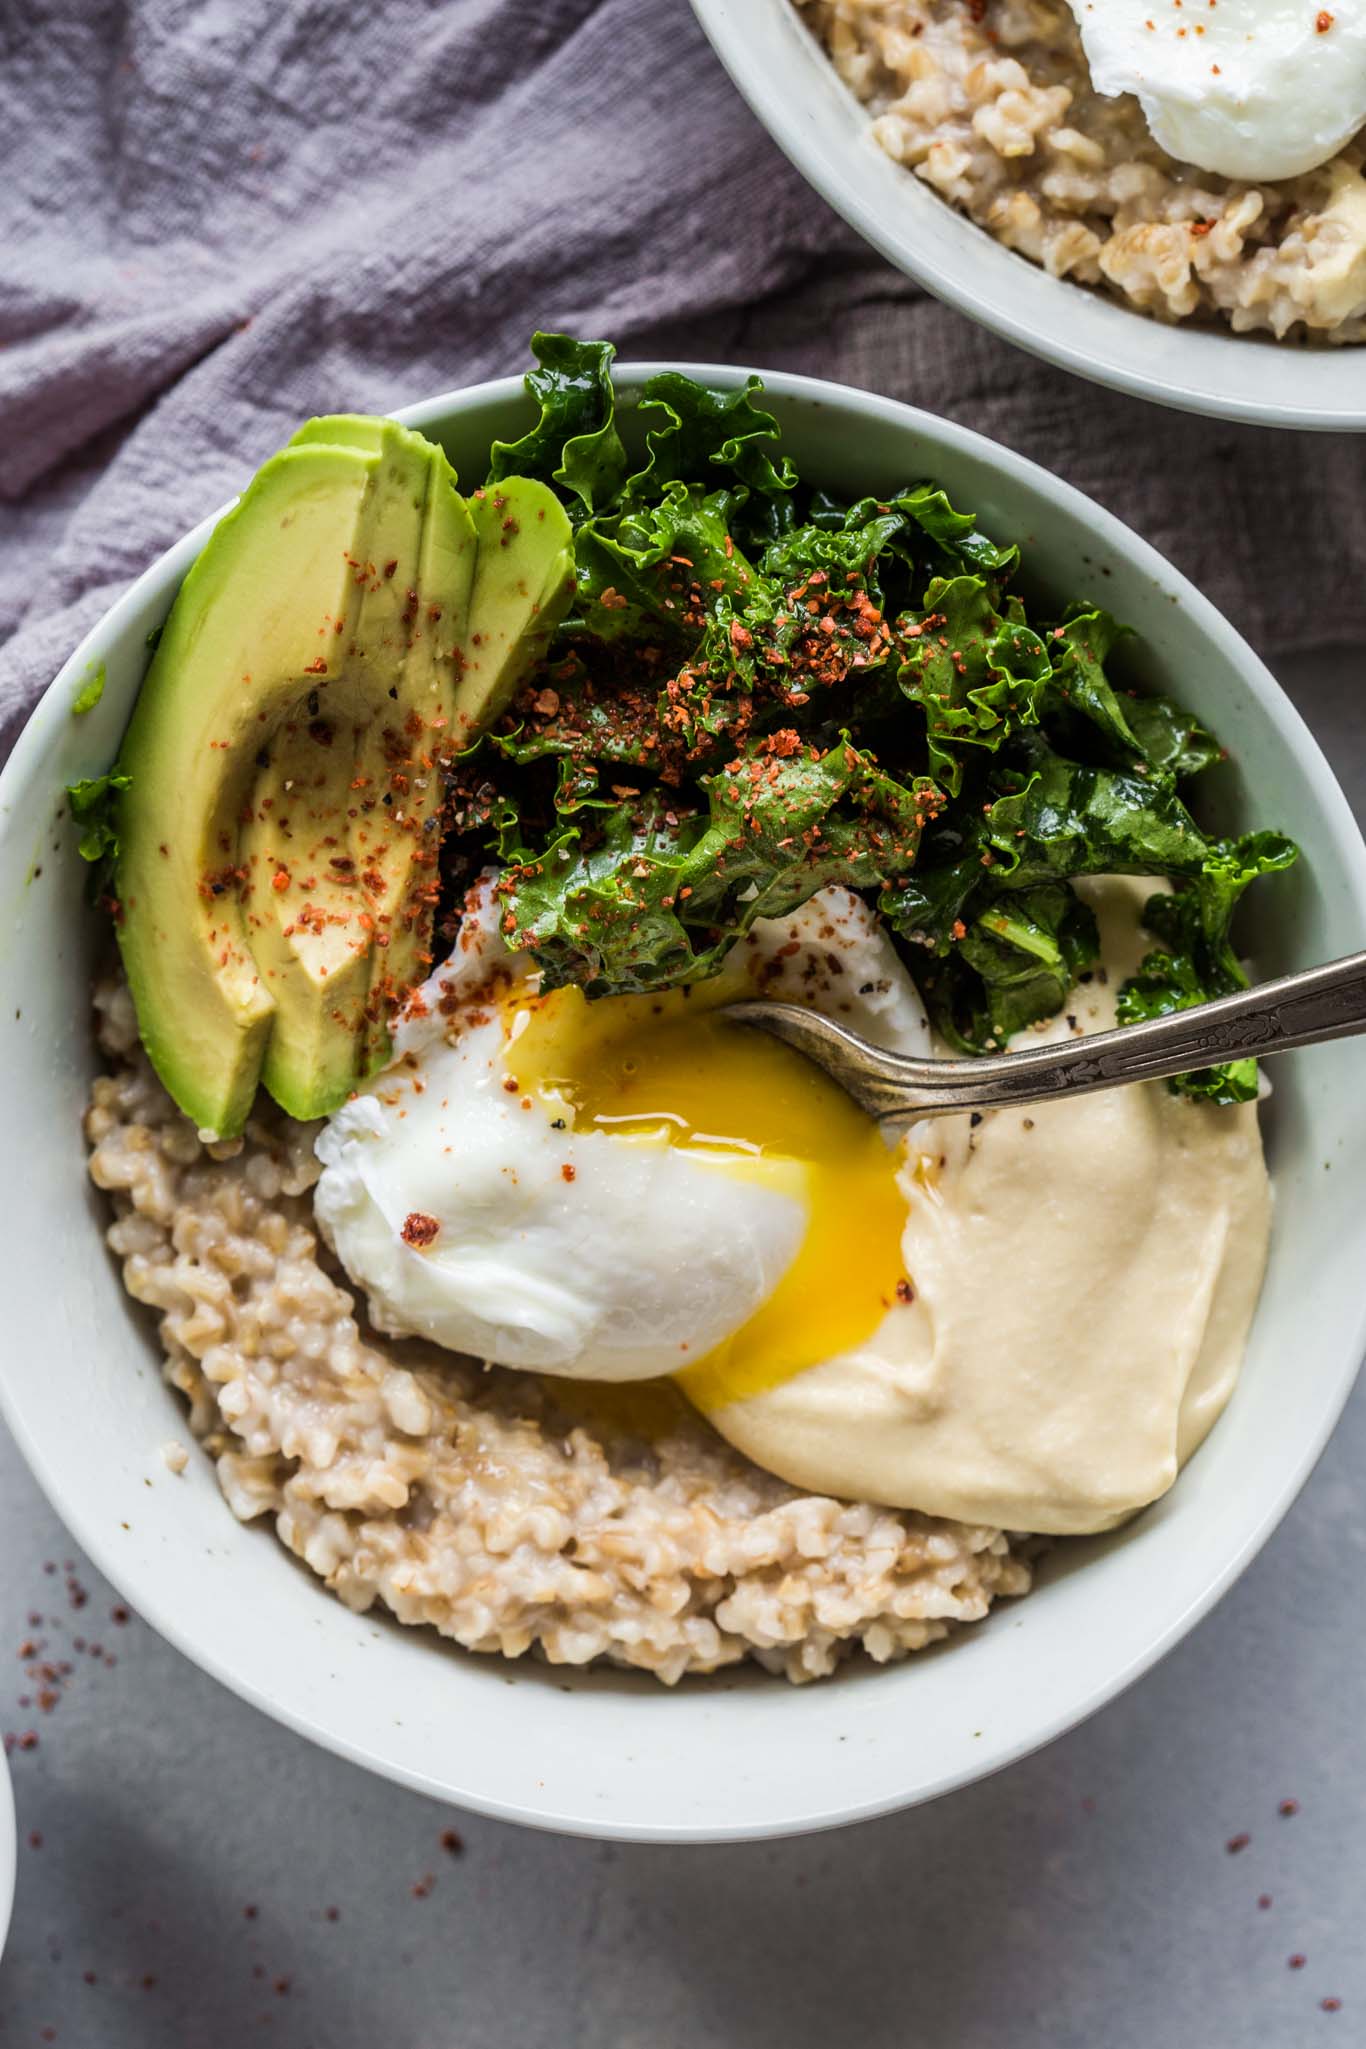 Avocado & Kale Savory Oat Bowls are the perfect way to start your day. Hearty oatmeal is topped with avocado, lemony kale salad, hummus and aleppo pepper for a protein-packed breakfast.